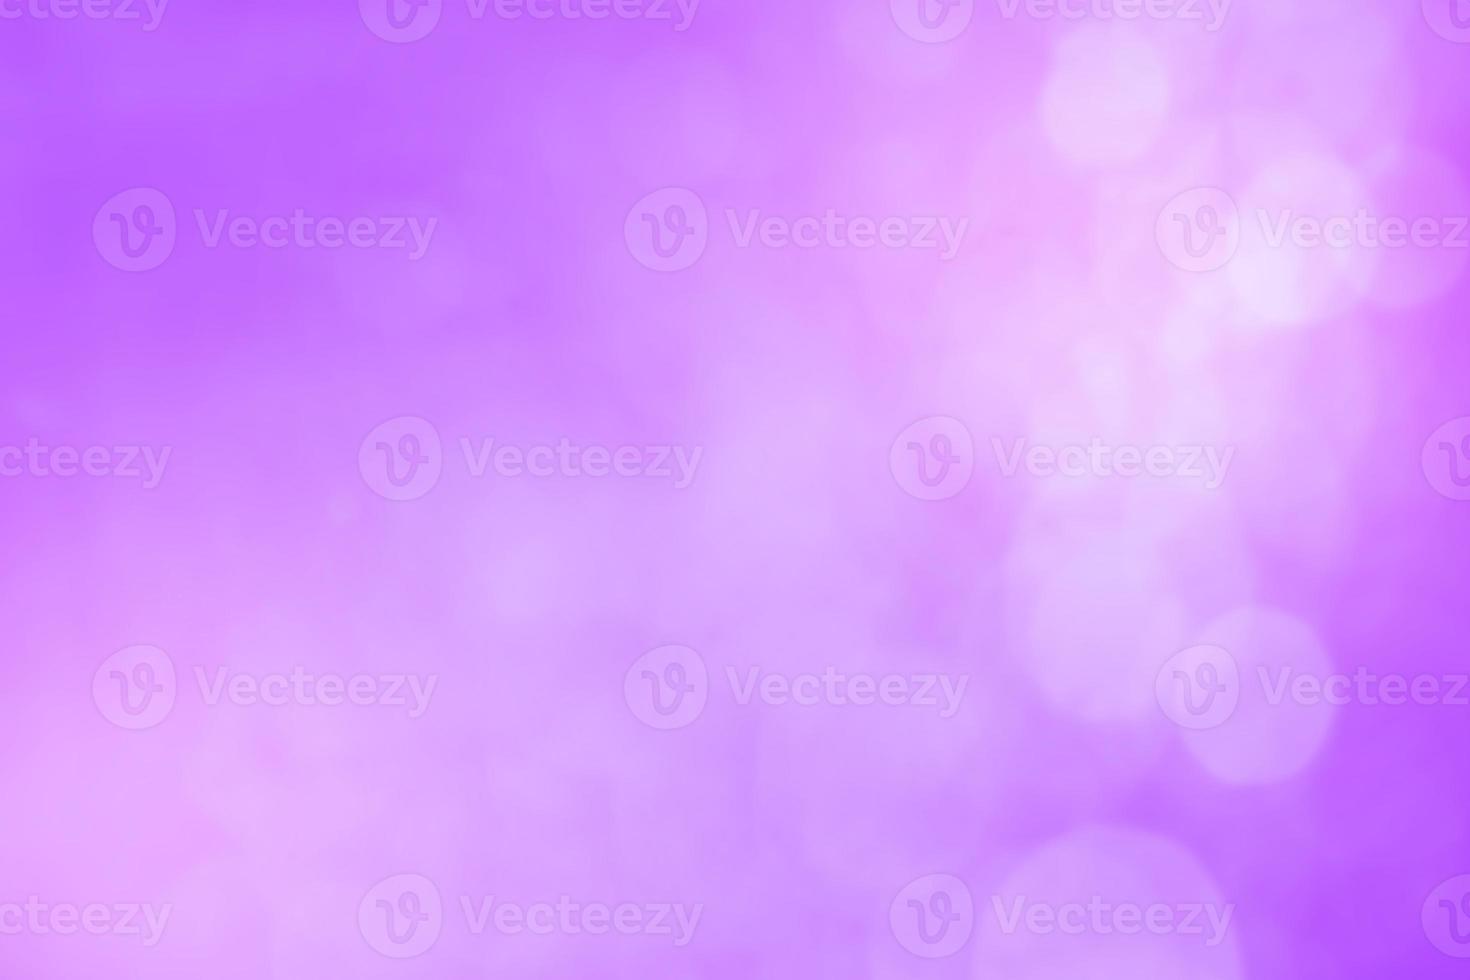 abstract purple background bokeh blur background photo